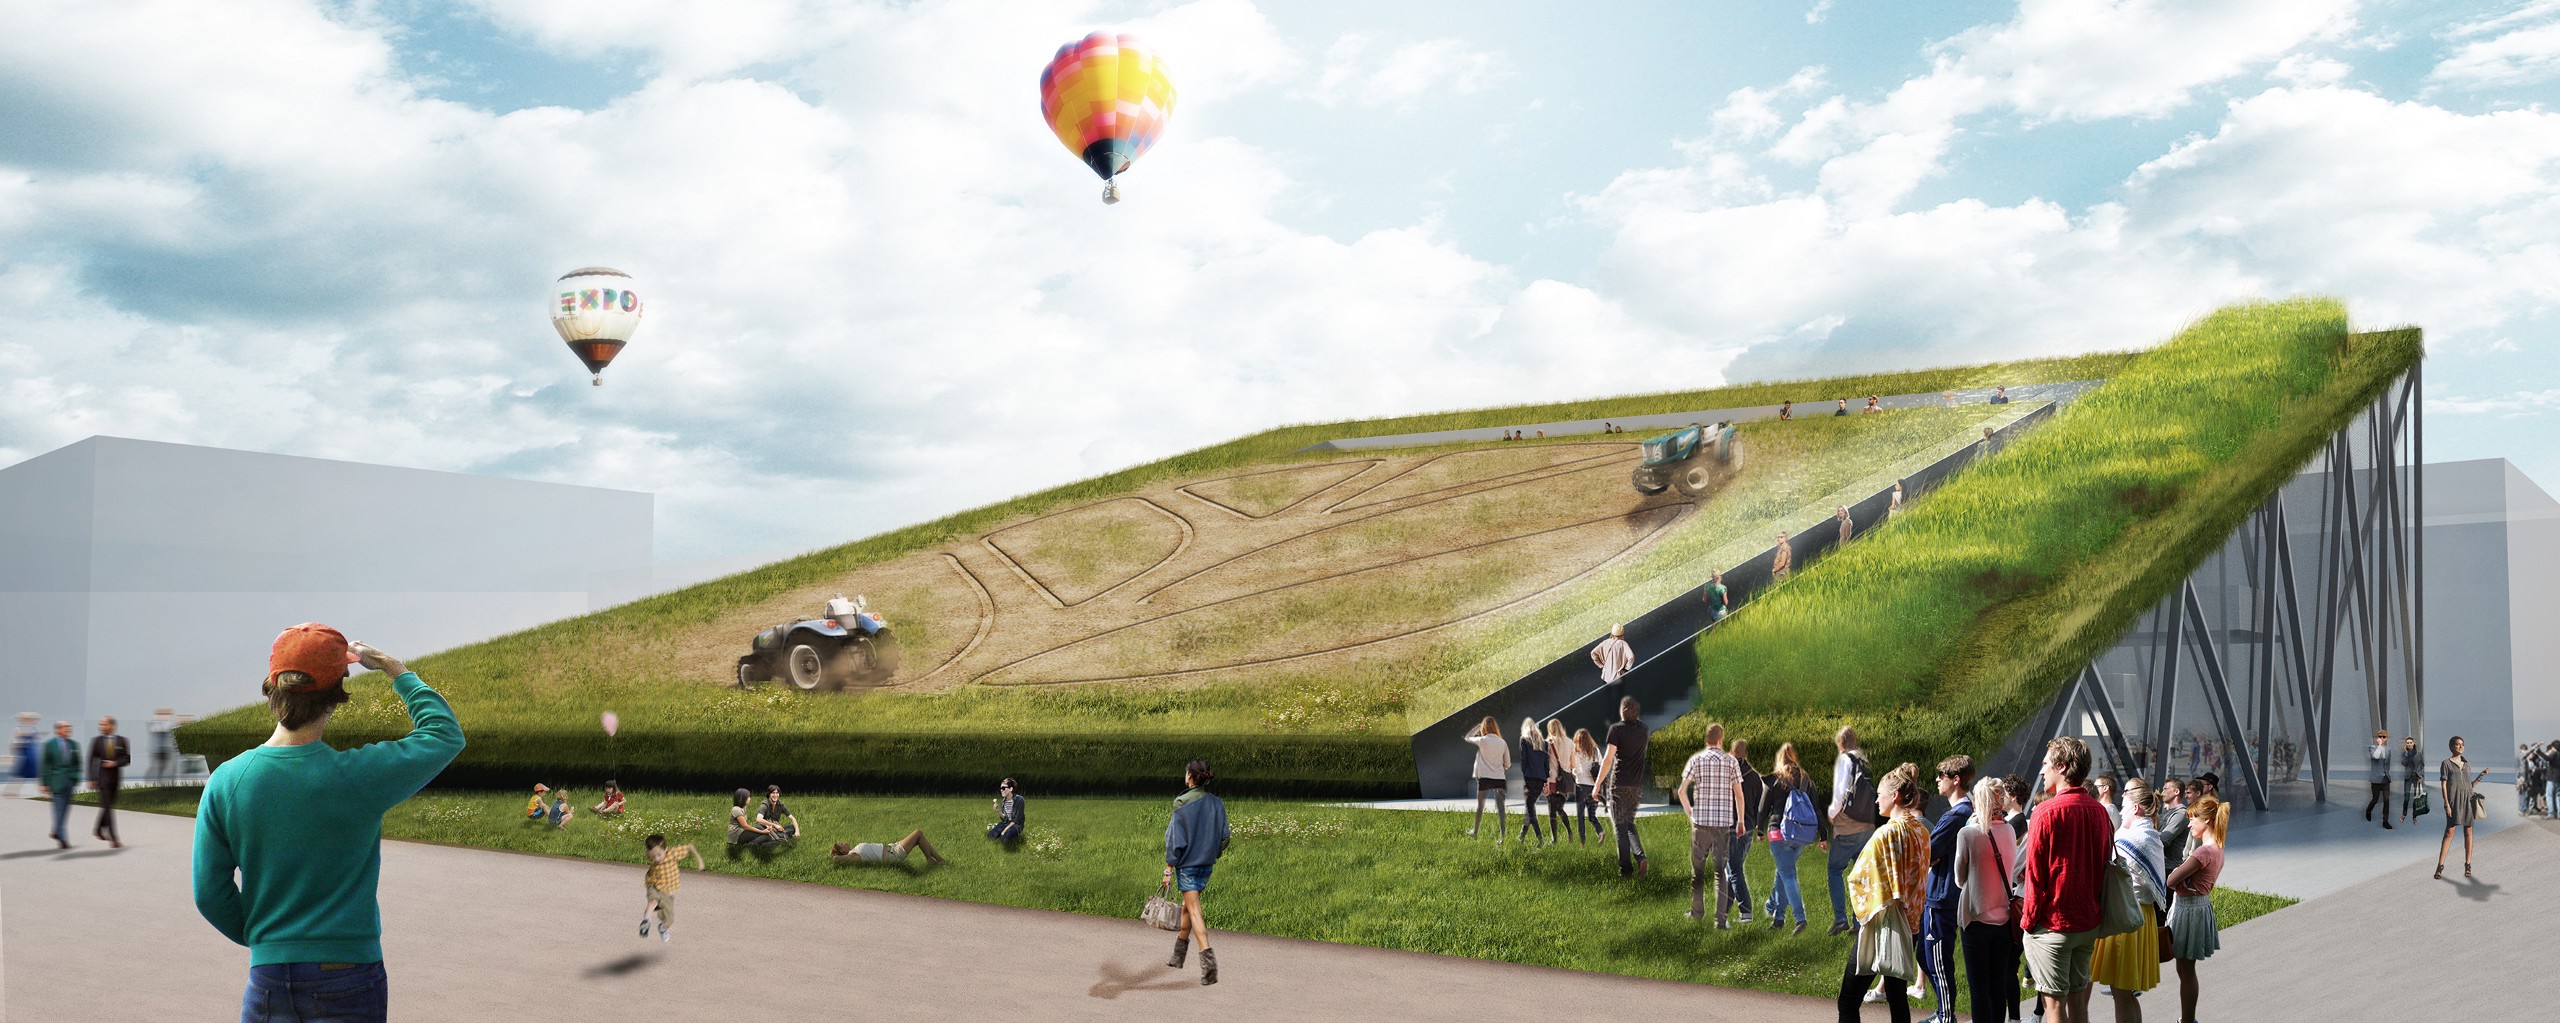 A CGI architectural rendering of a building with a sloped roof with a farm on it, being harvested by threshing machines.